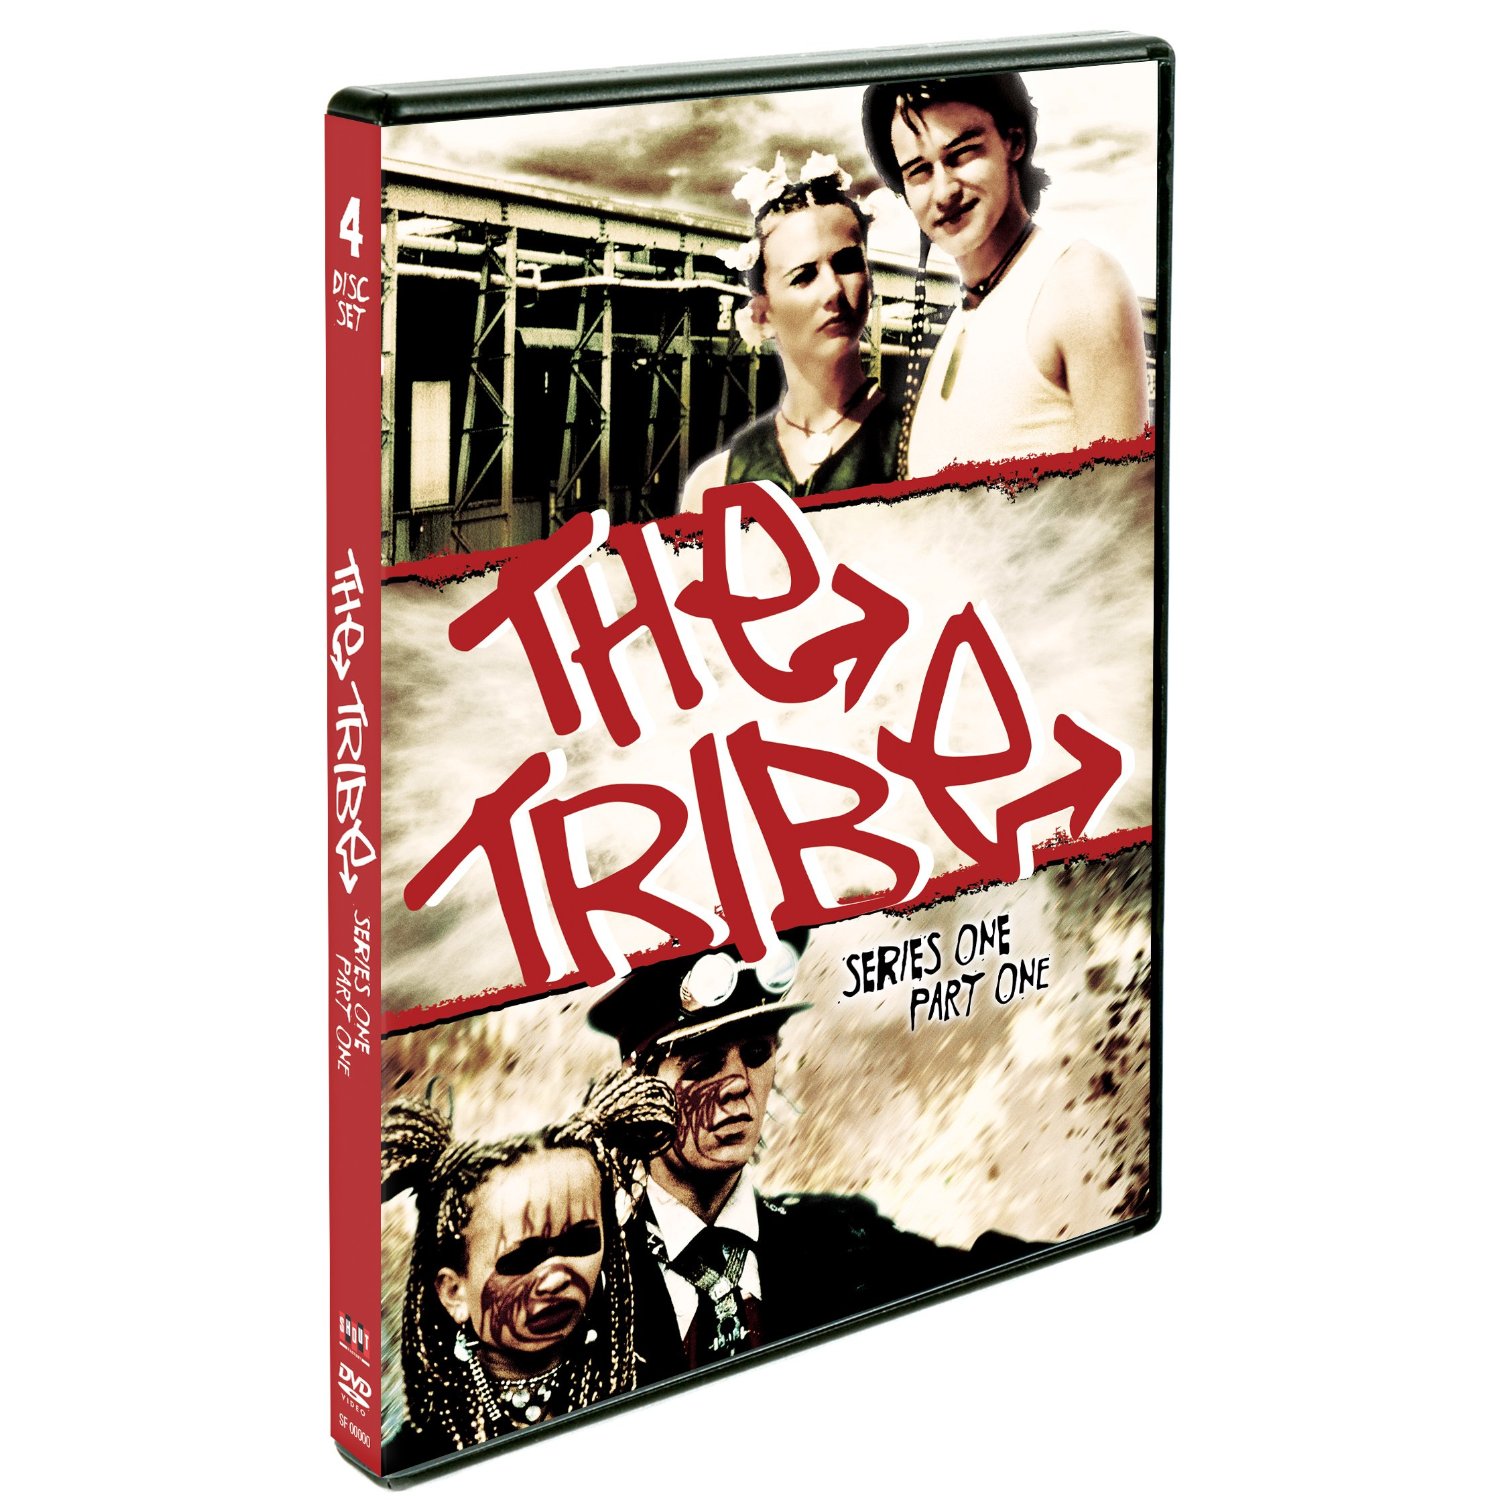 The Tribe: Series 1, Part 1 movie